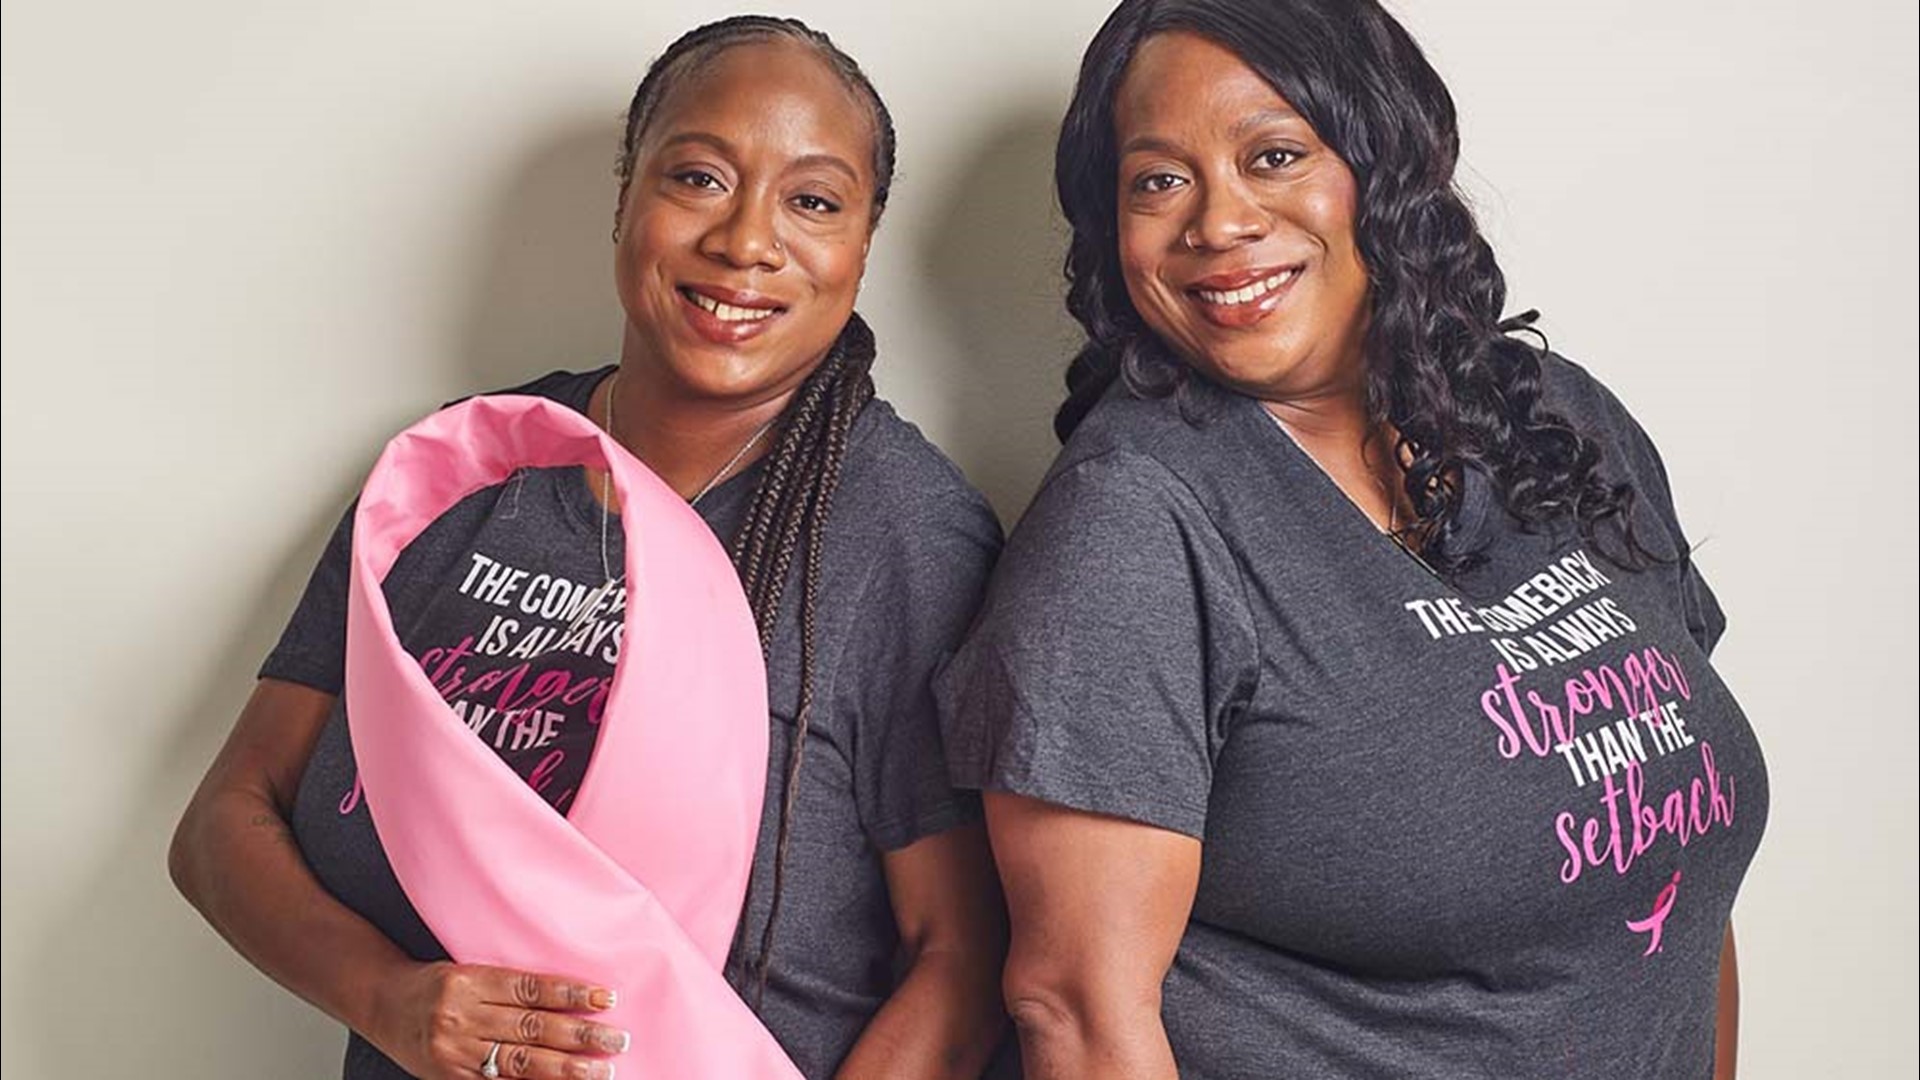 At 37, Houston twins diagnosed with breast cancer 4 months apart